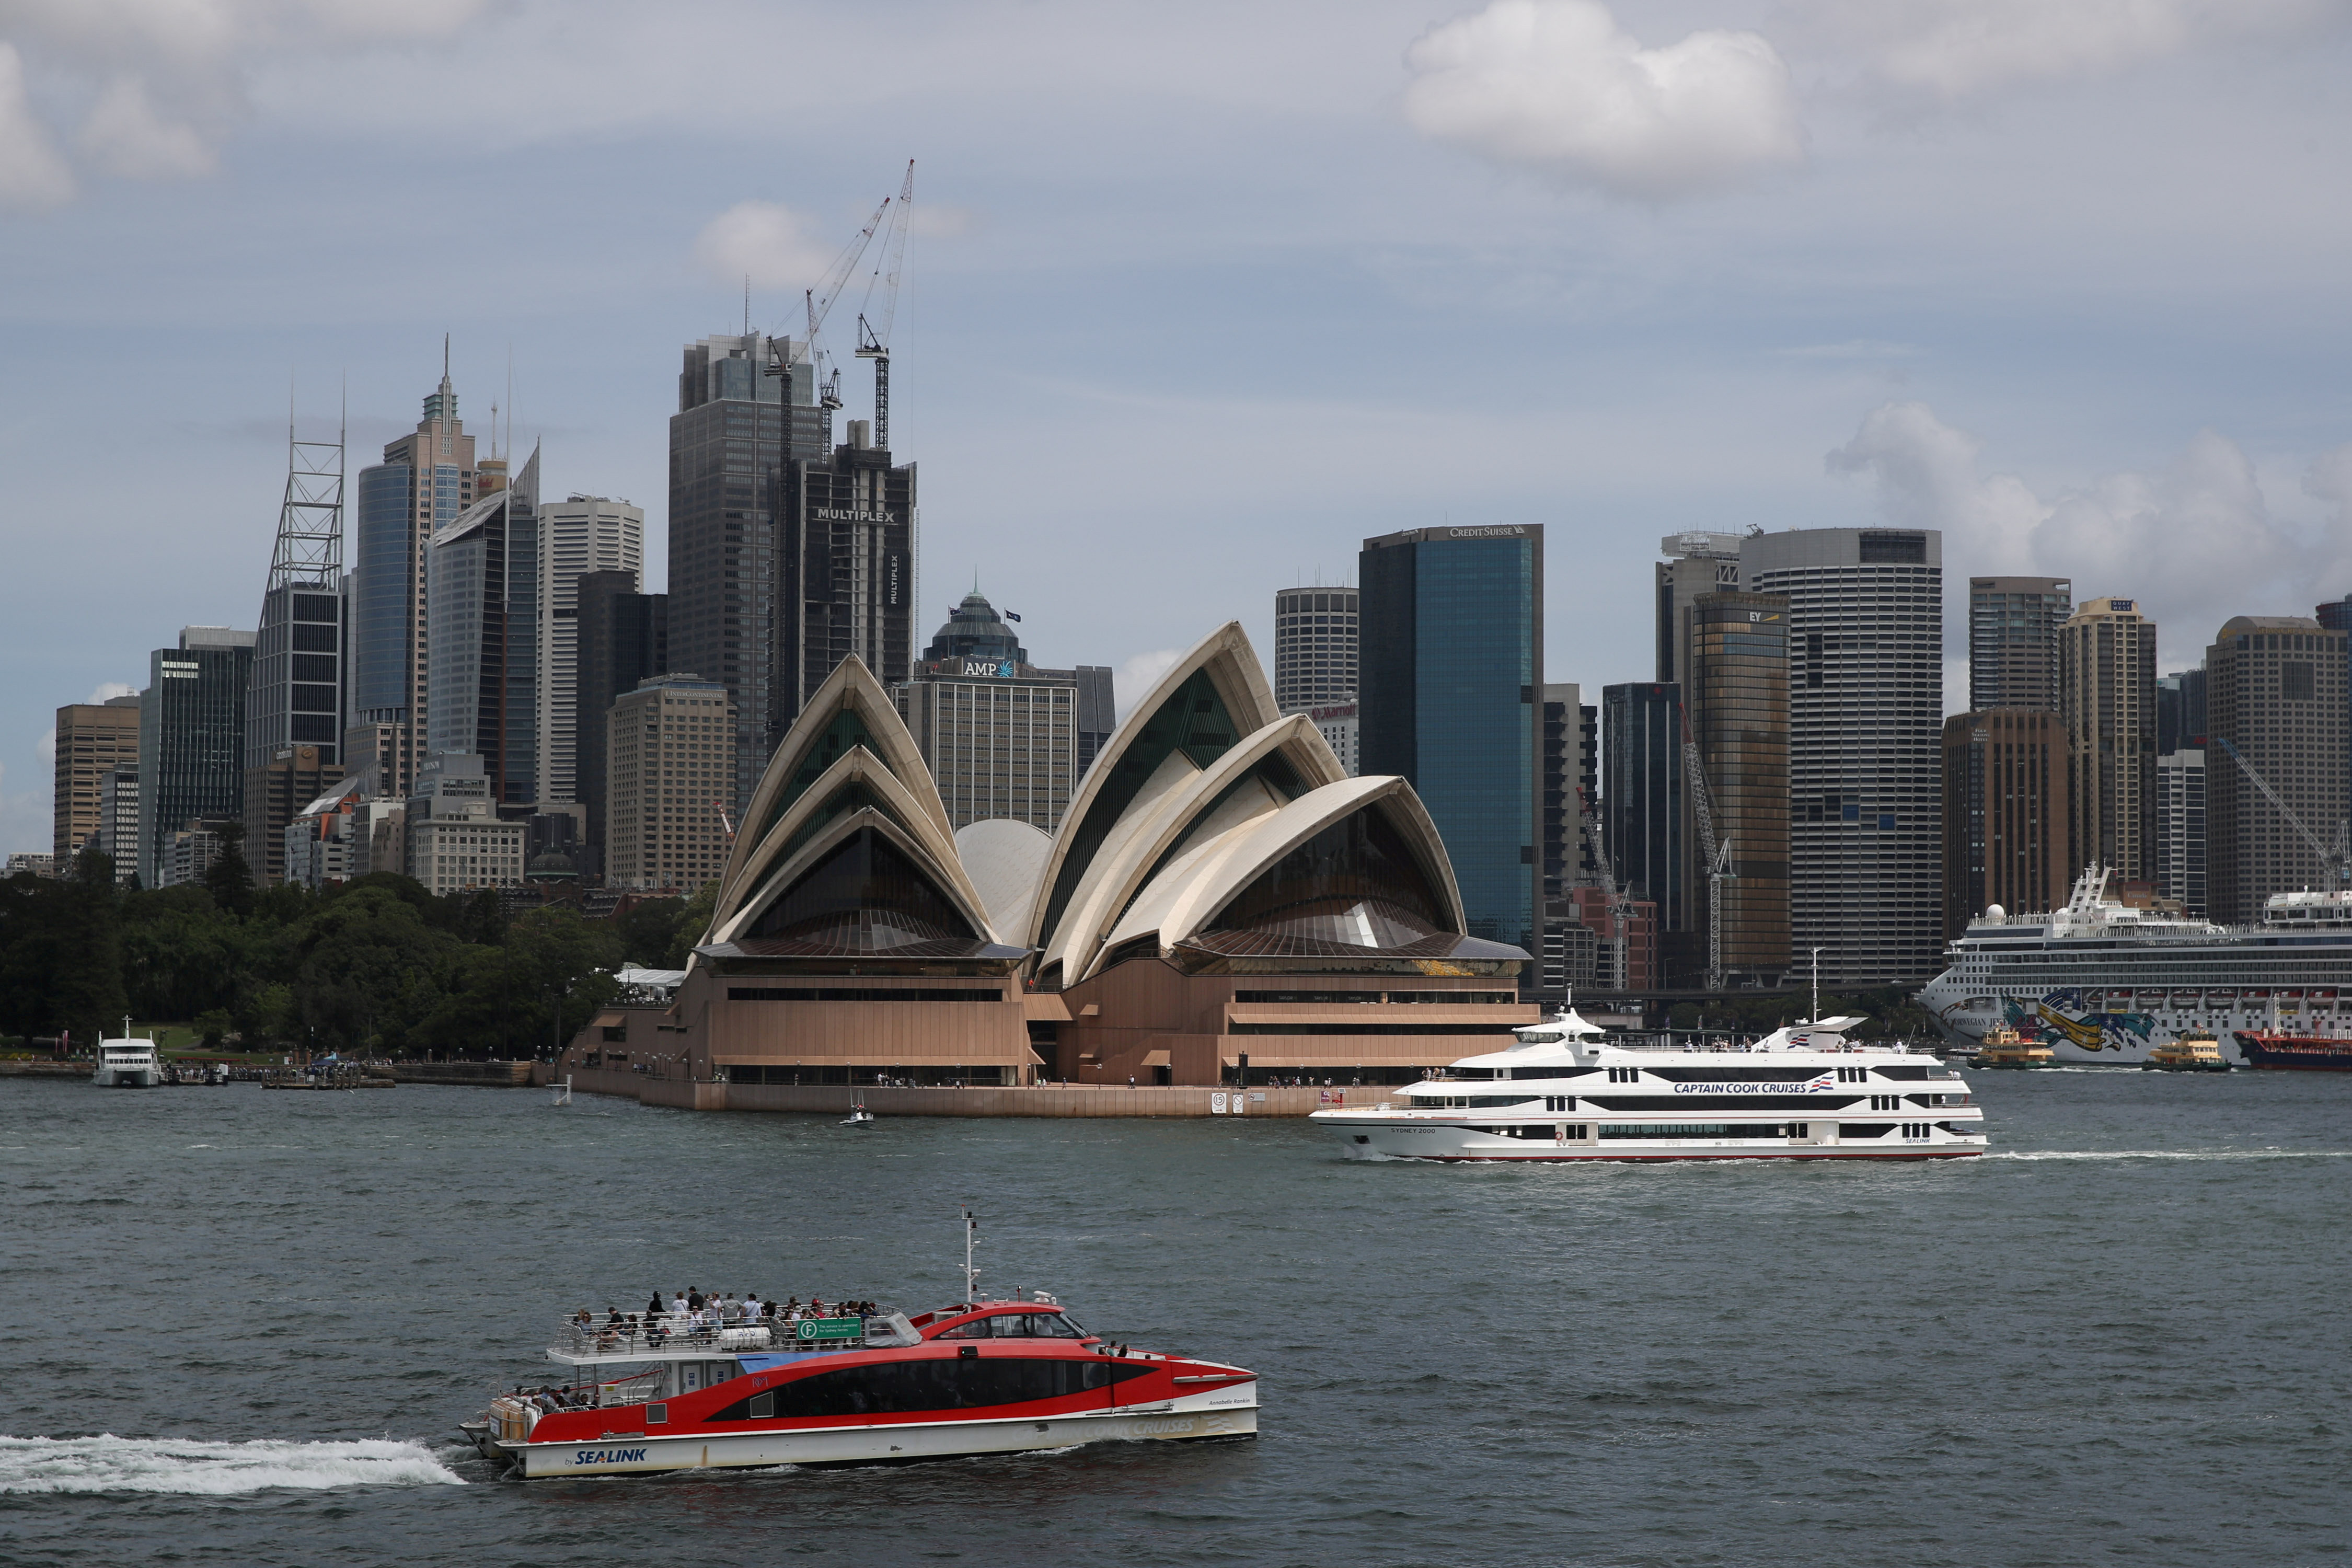 The Sydney Opera House and city centre skyline are seen in Sydney